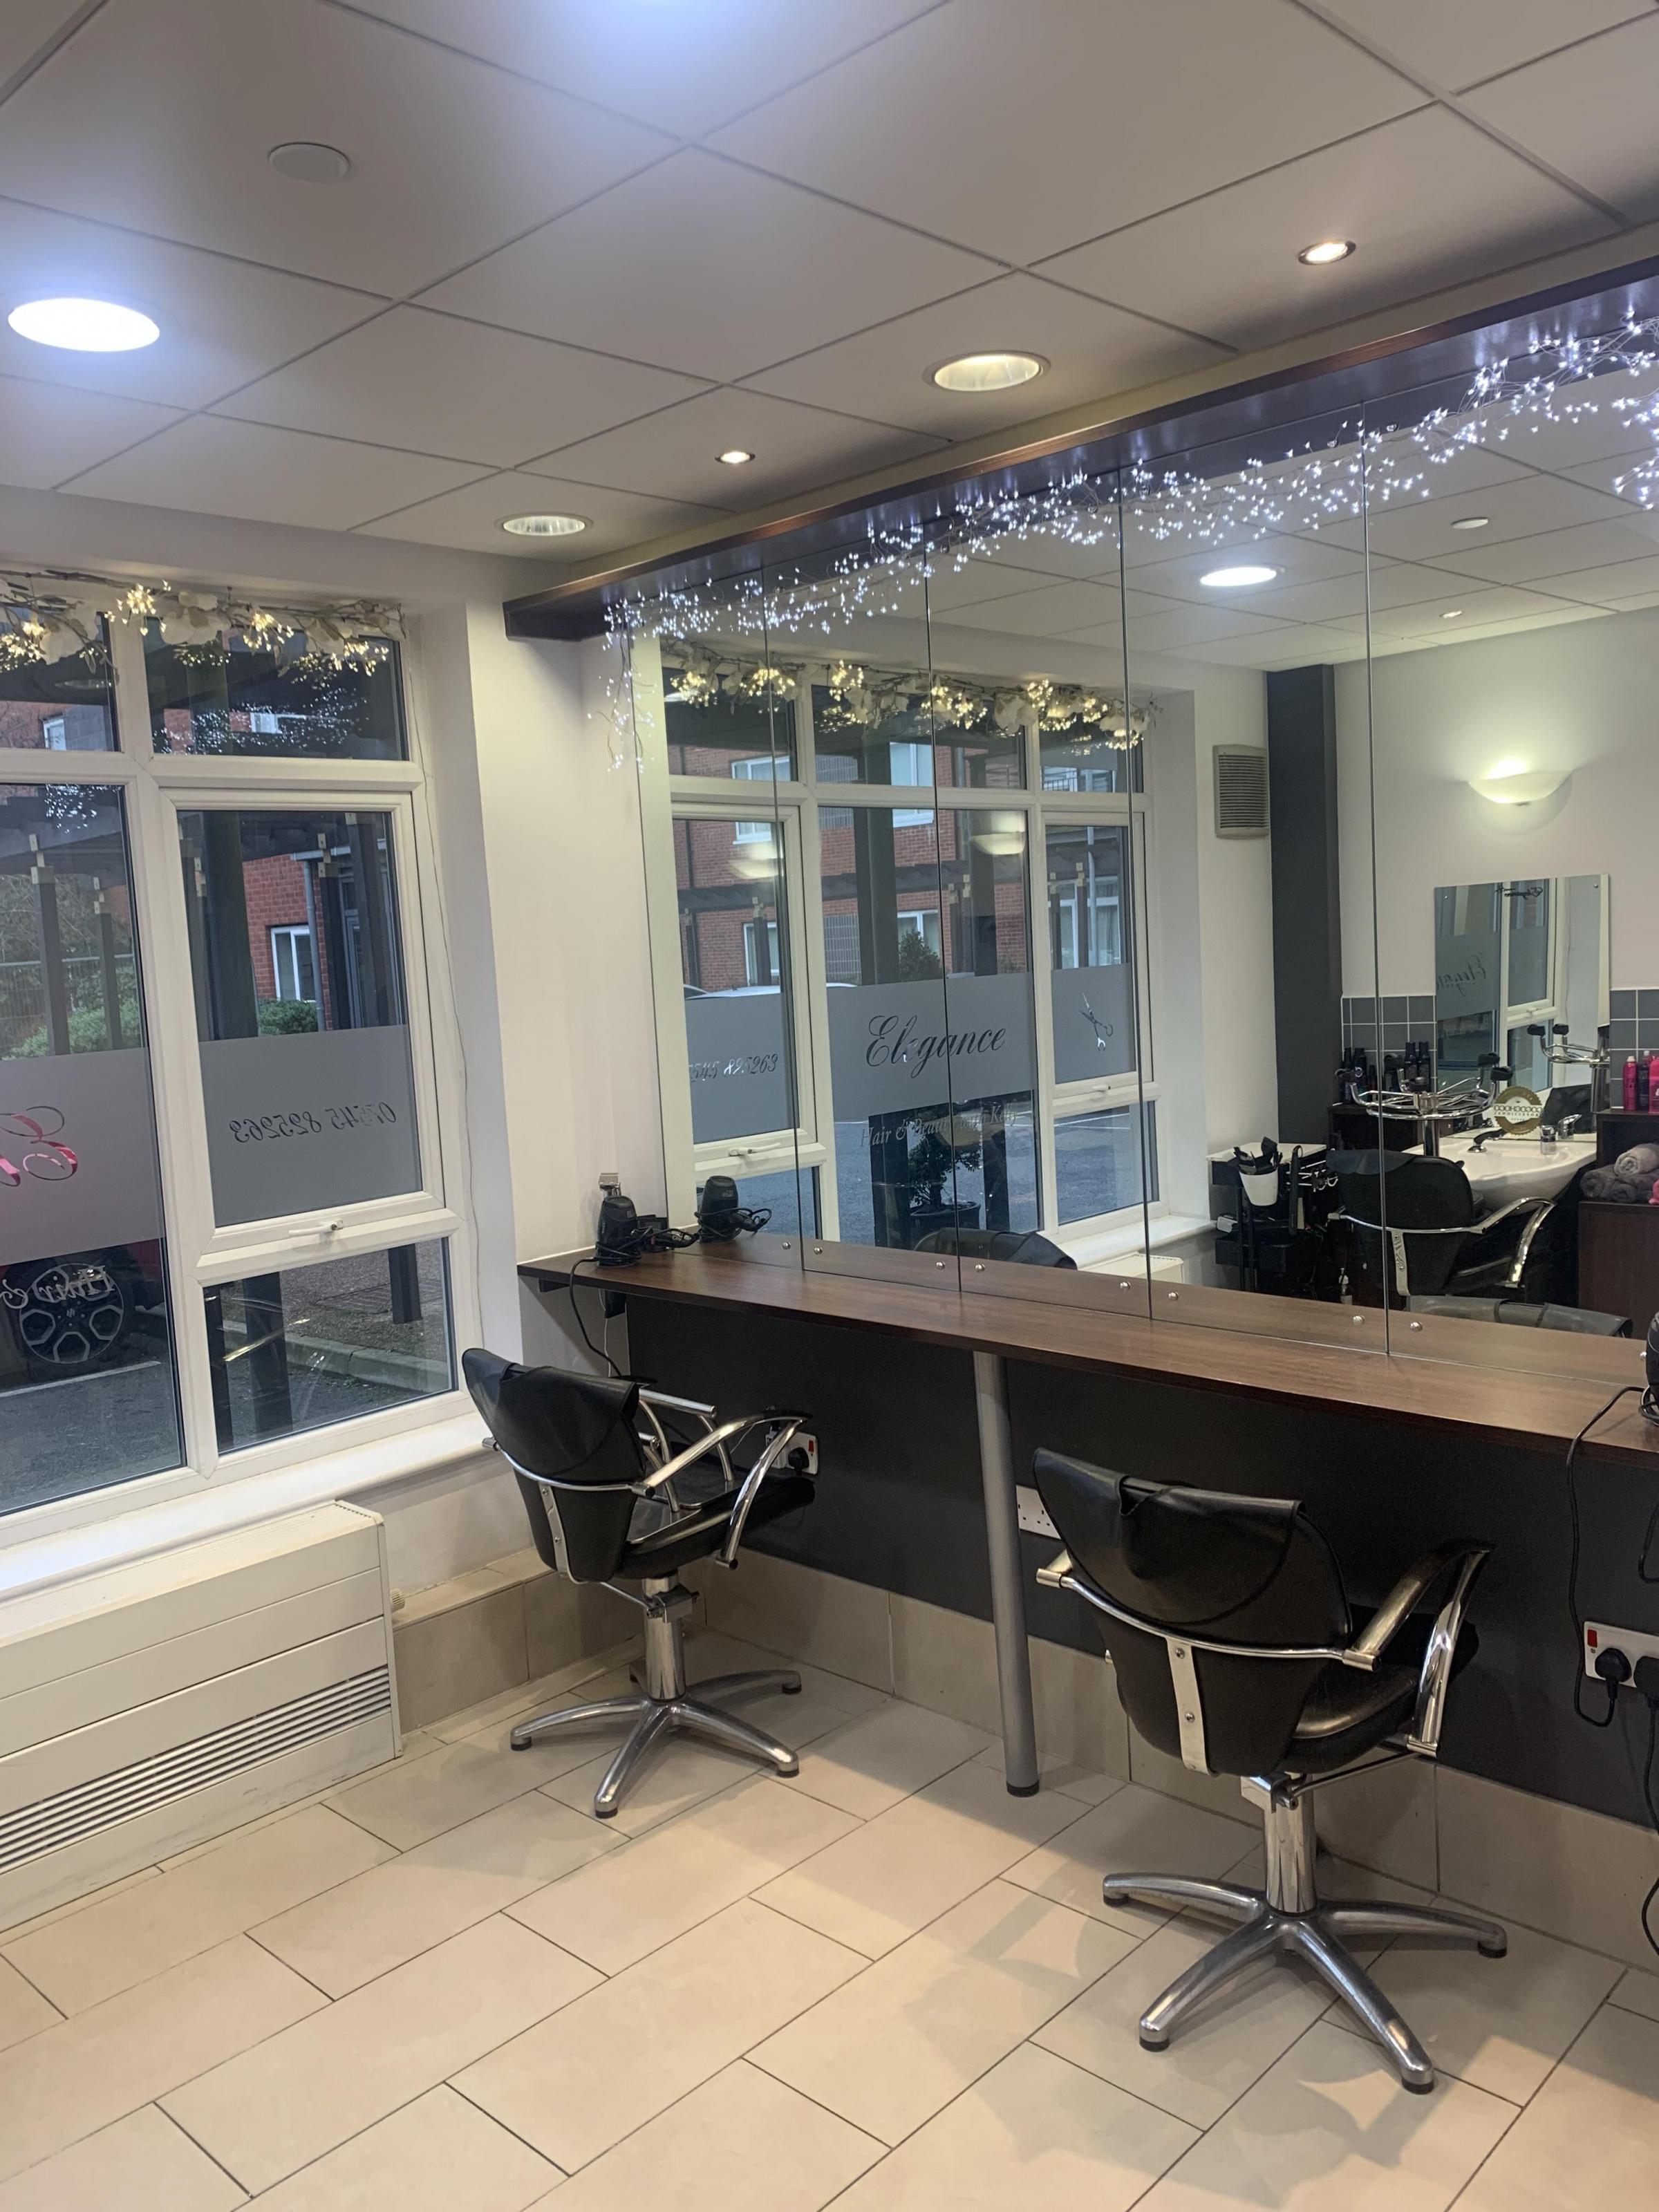 The salon is located in Willowmere, Middlewich